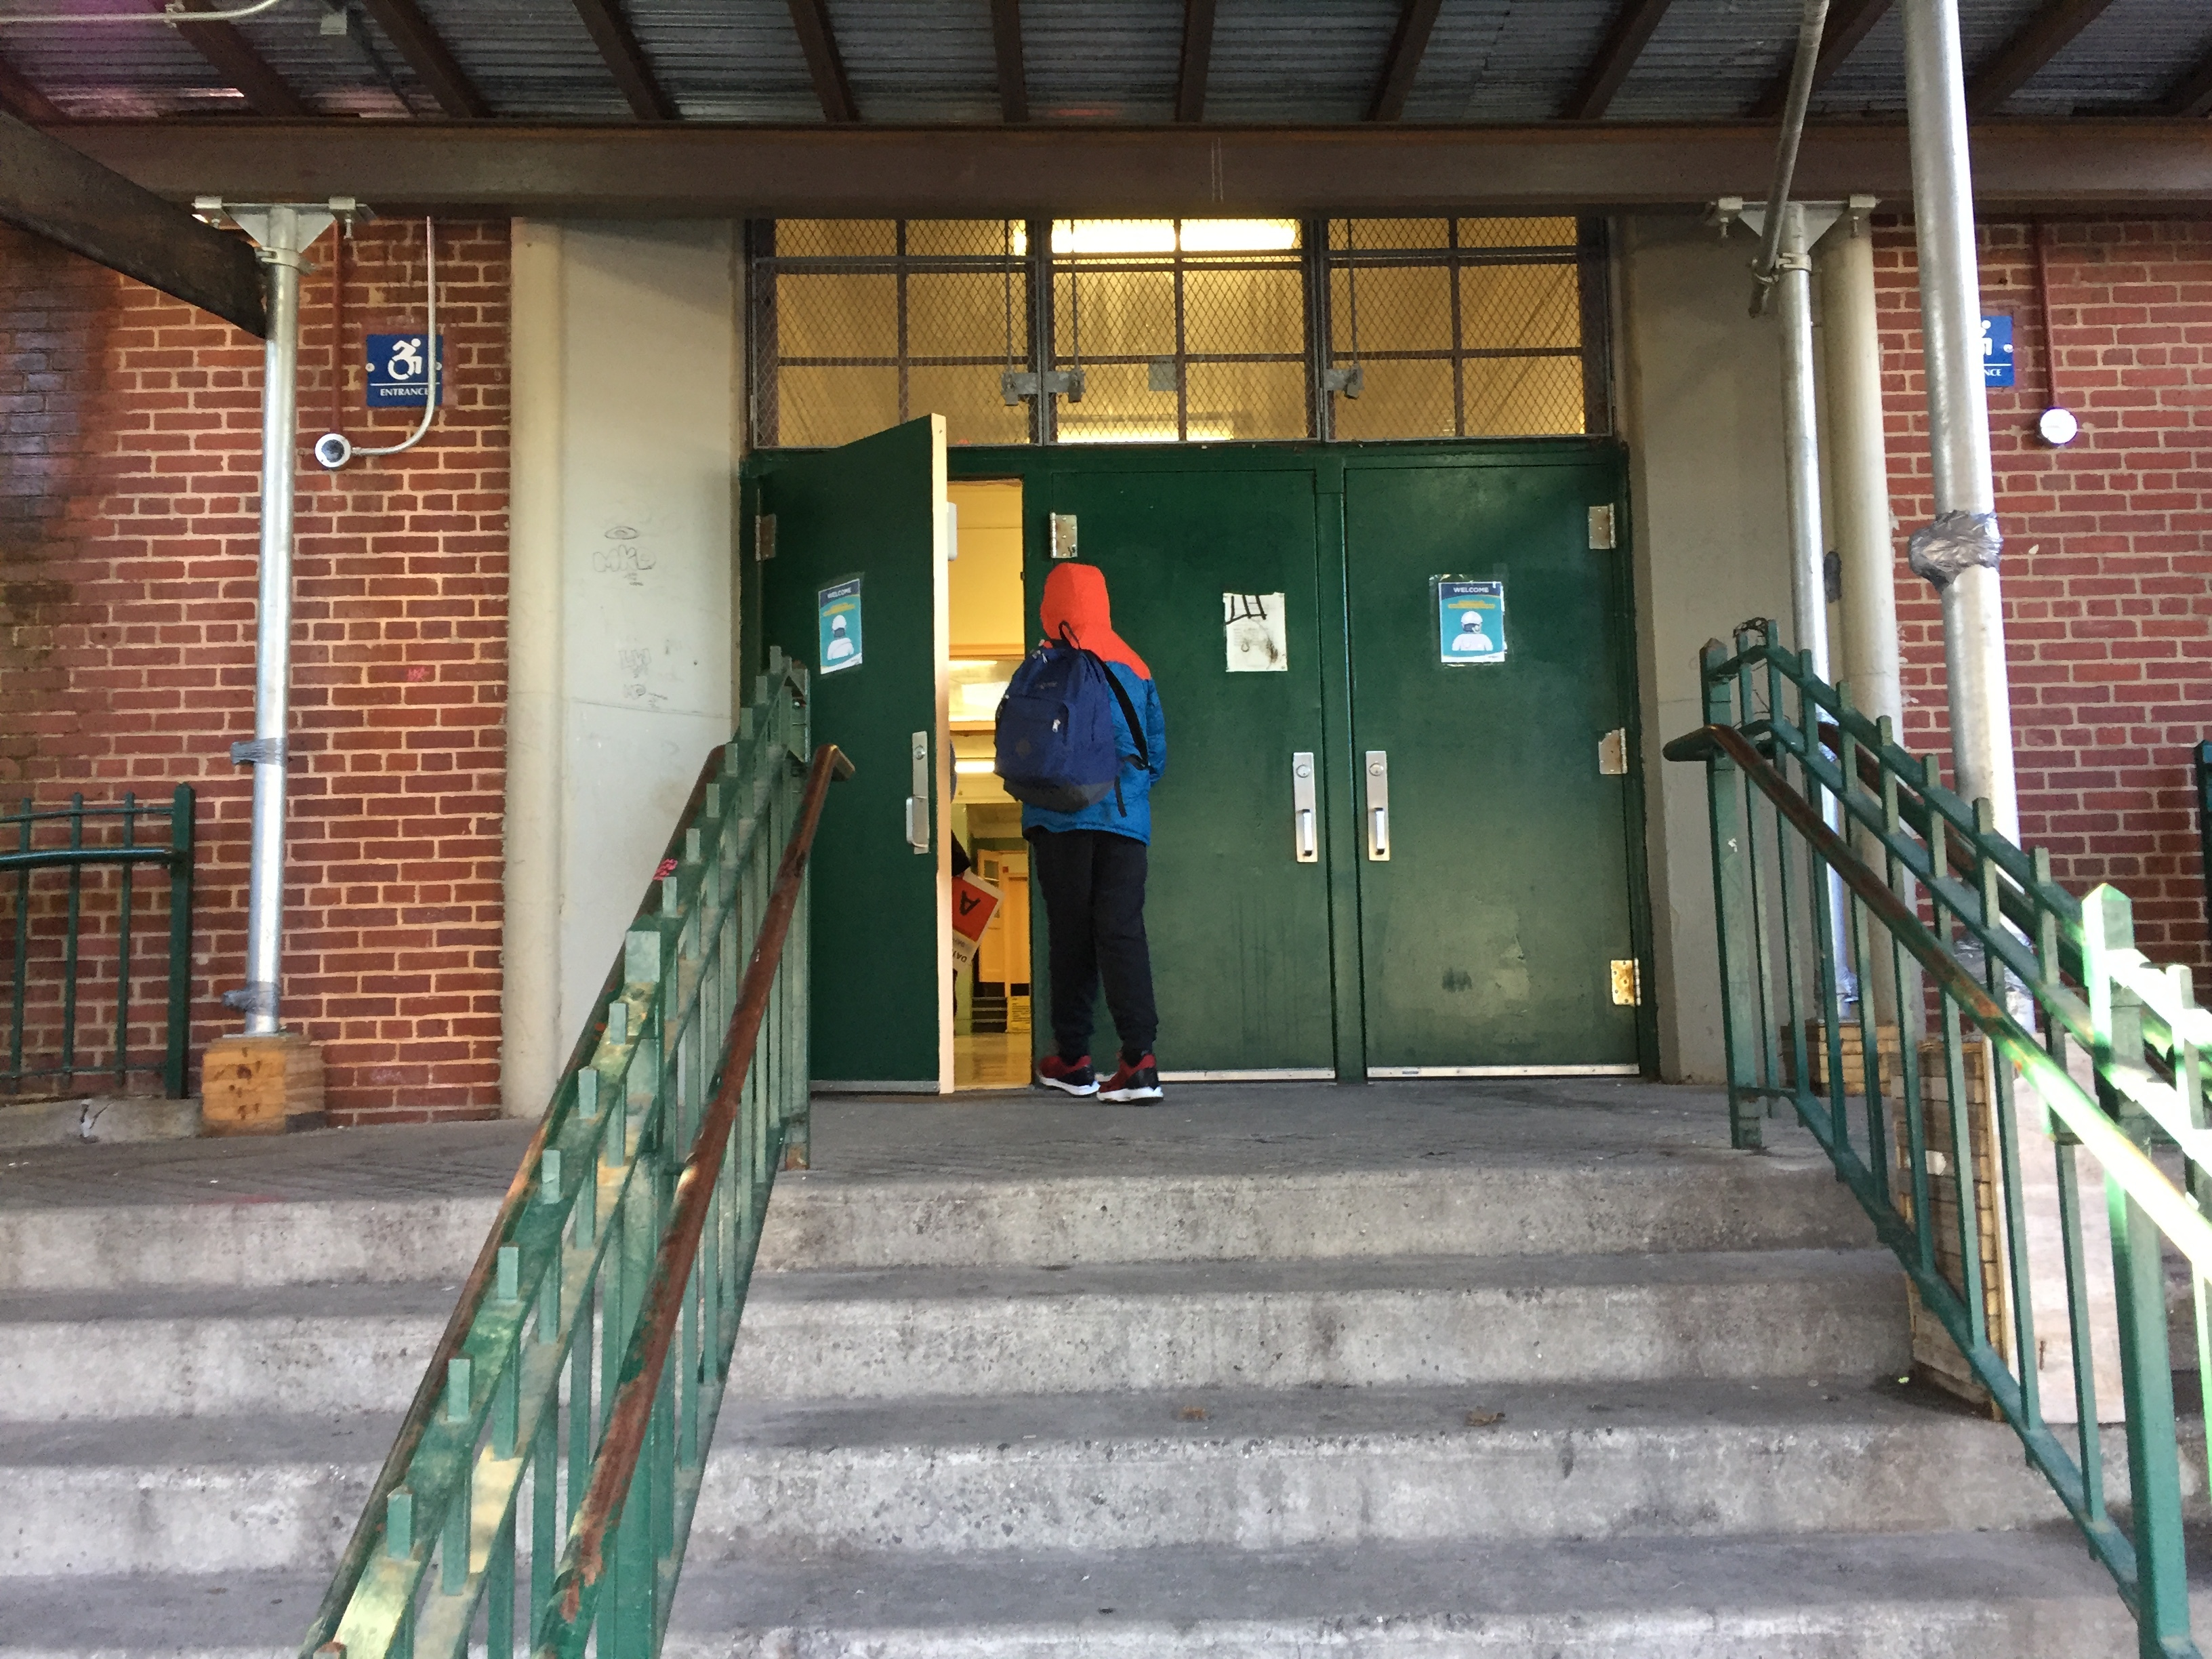 Students at M.S. 51 in Park Slope, Brooklyn walk into the building, socially distanced and masked. The foreground is steps and a green railing.